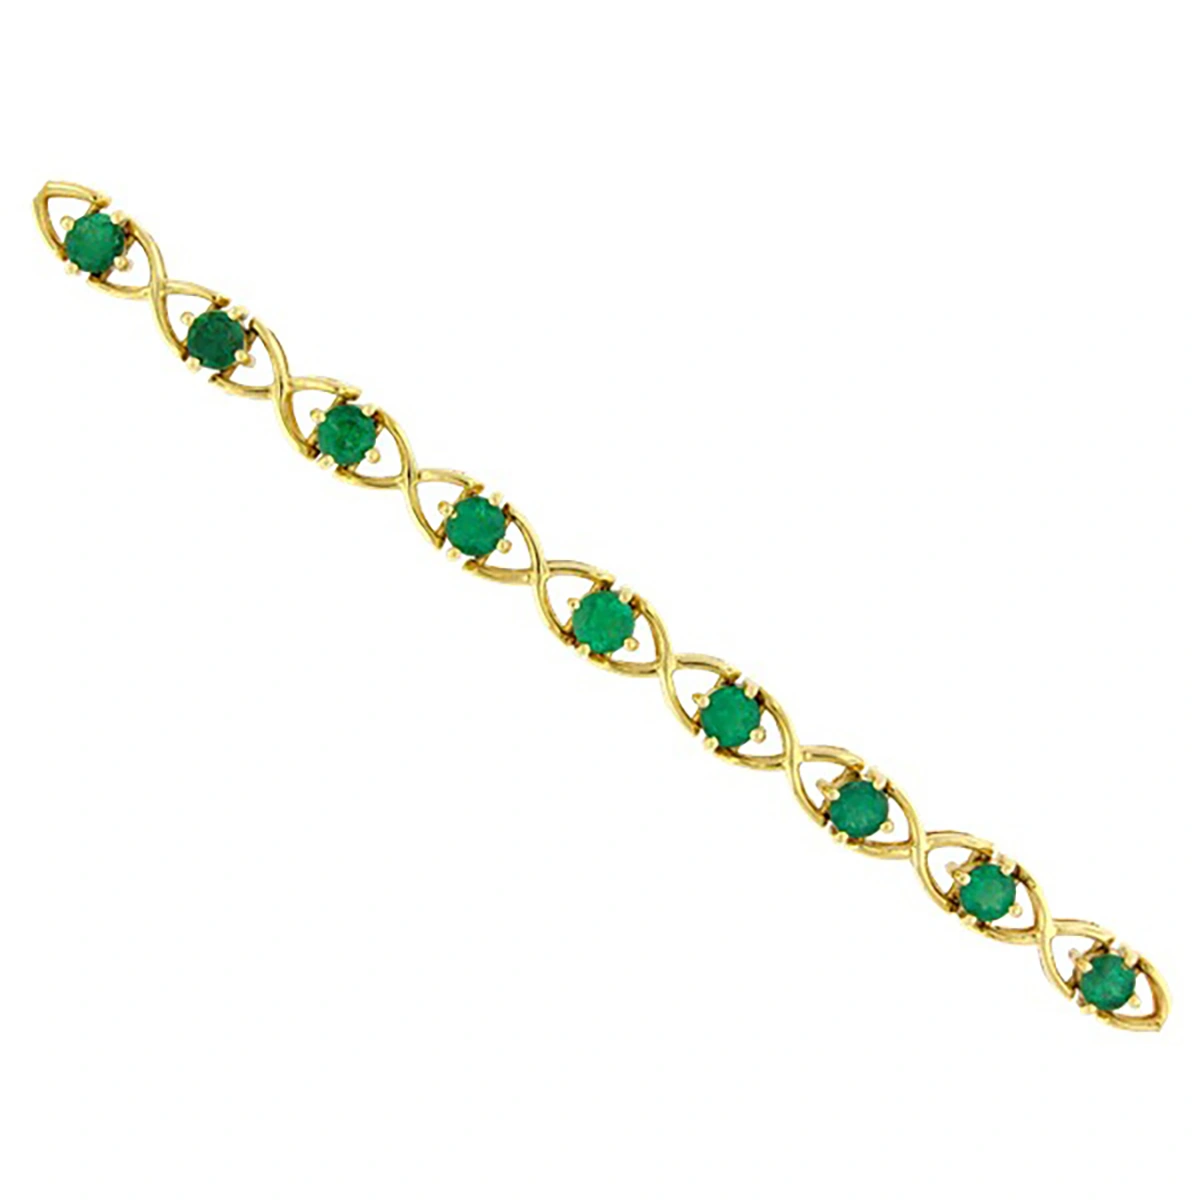 18k-yellow-gold-emerald-bracelet-with-16-round-cut-natural-colombian-emeralds